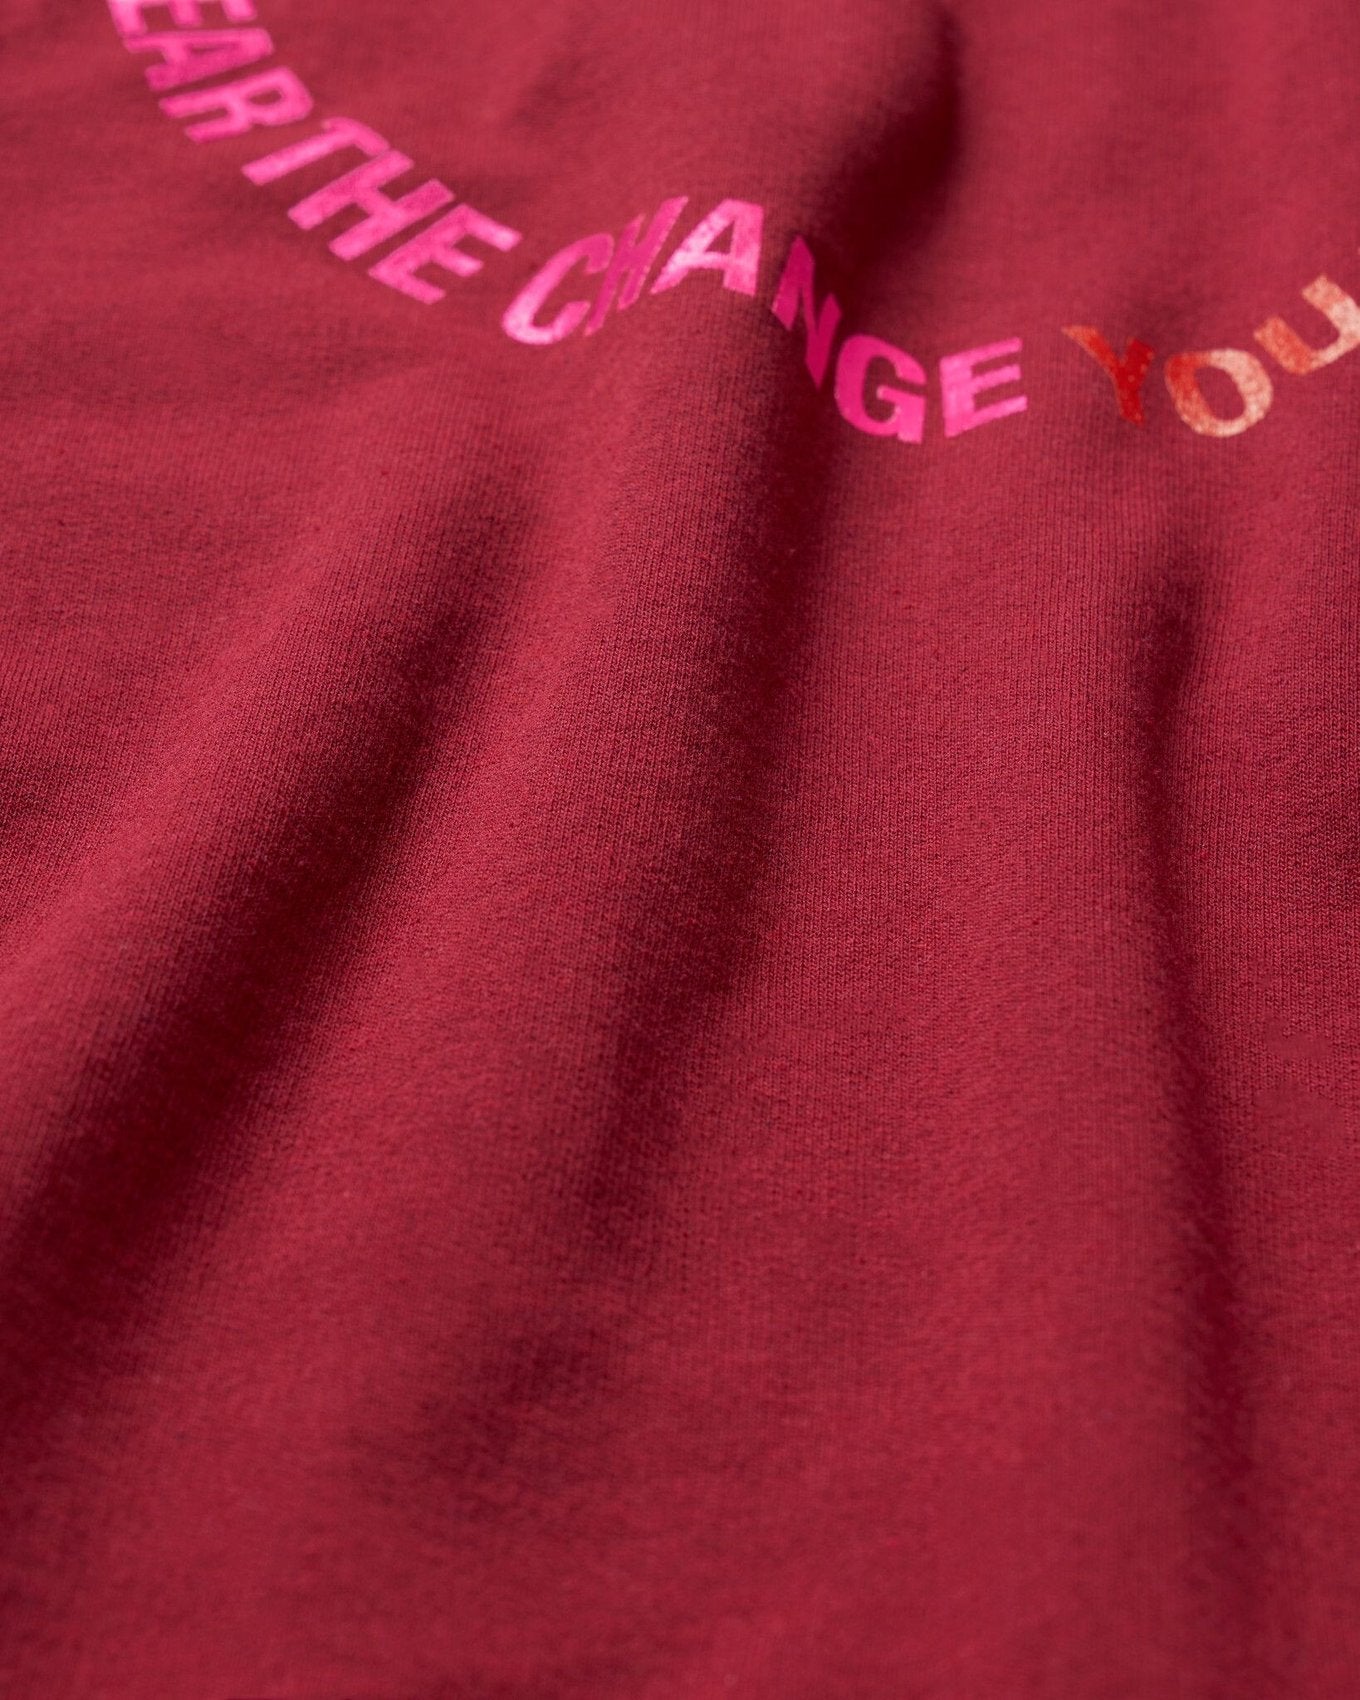 ReApparel Change Crew Neck . in color Garnet and shape long sleeve